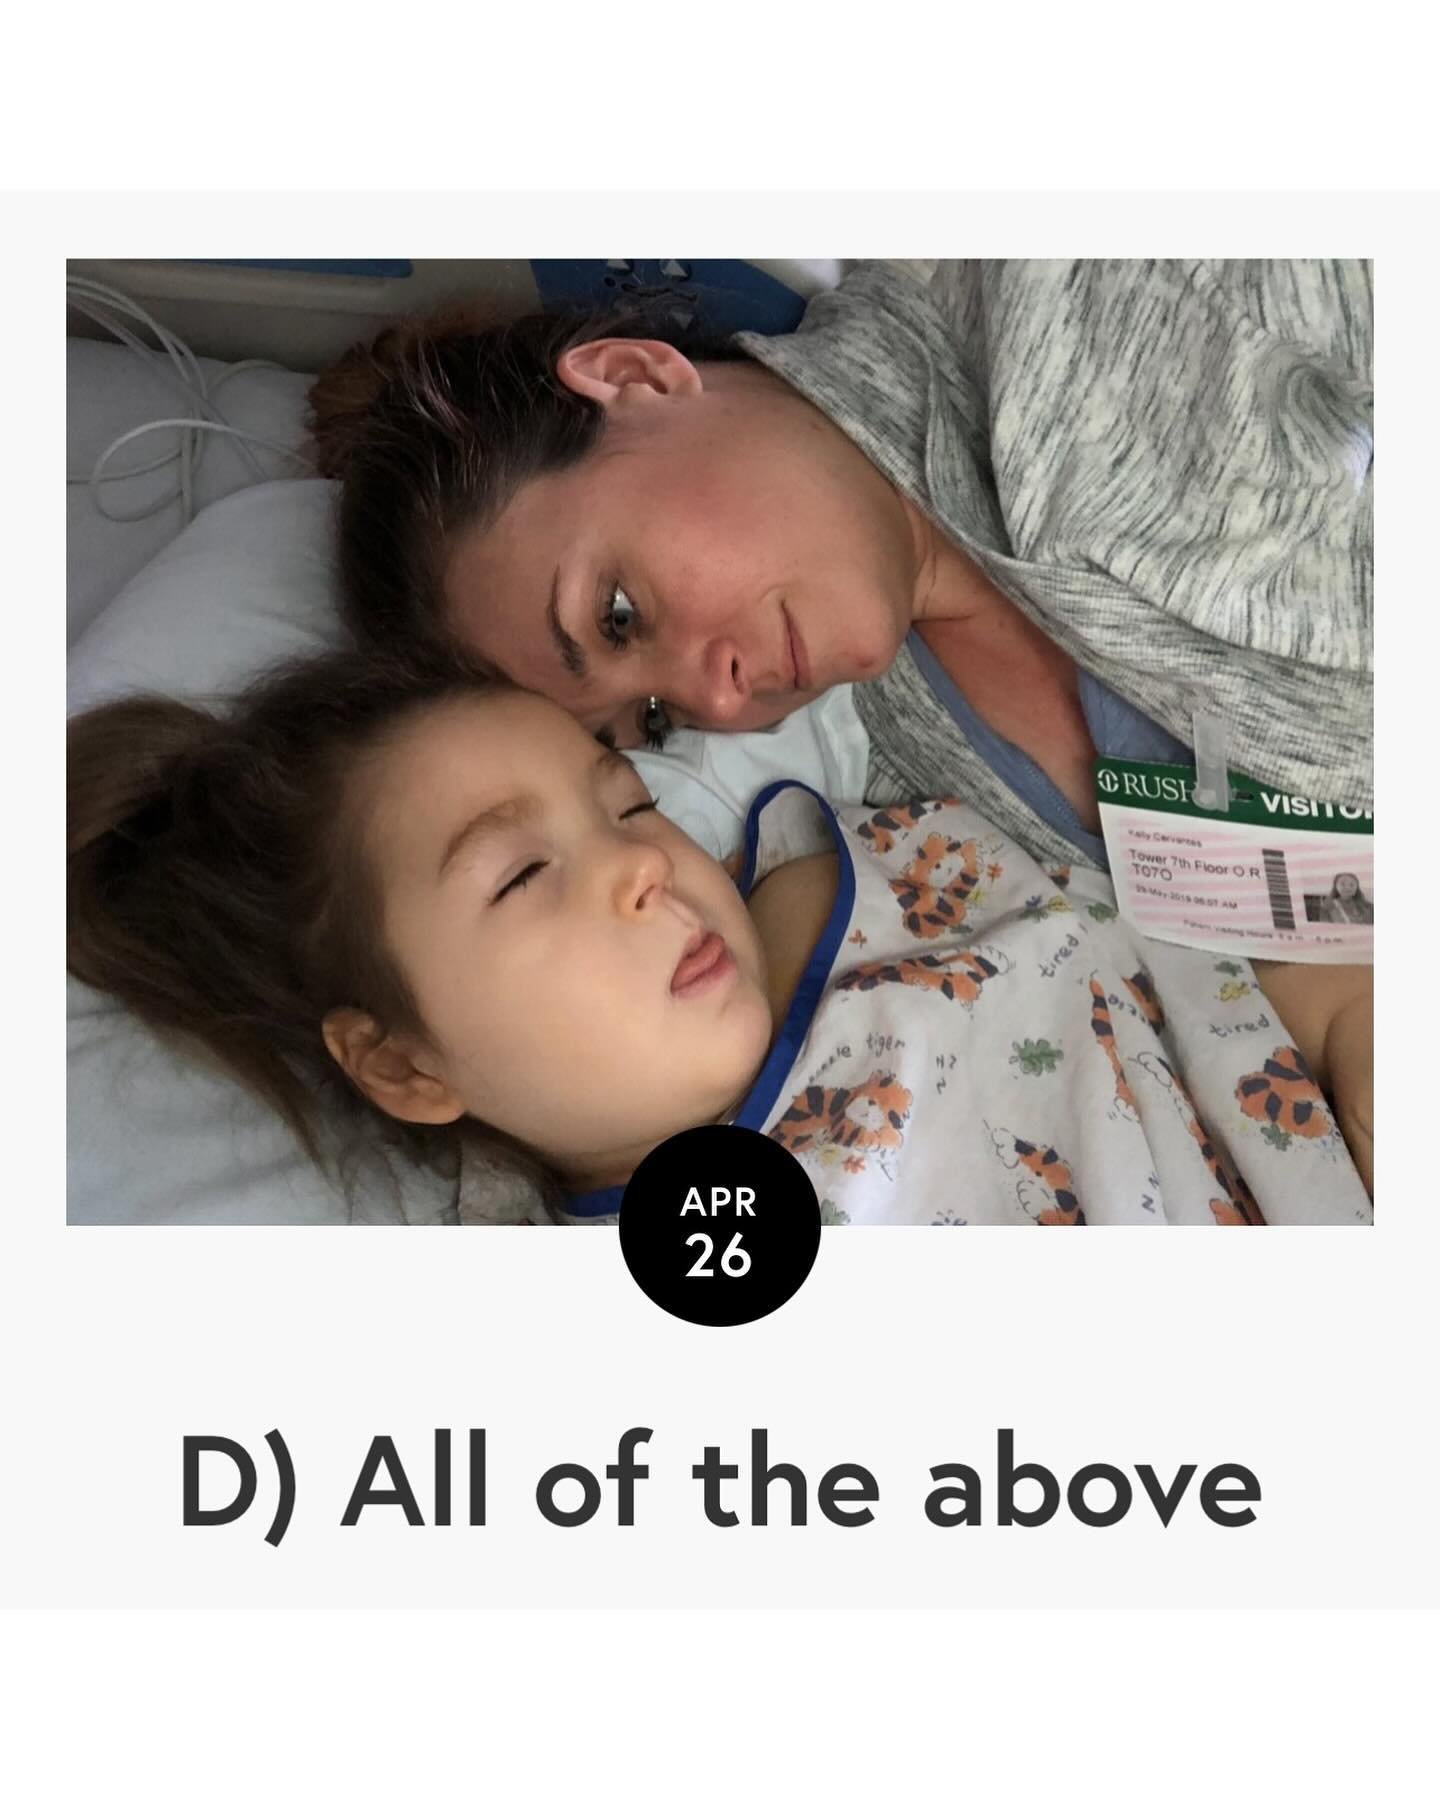 *NEW BLOG* &ldquo;D) All of the above&rdquo;

Words and I have been tight for decades now. First, it was talking about my feelings (thanks Mom), and more recently I turned to writing. But these last couple of weeks I&rsquo;ve been struggling to find 